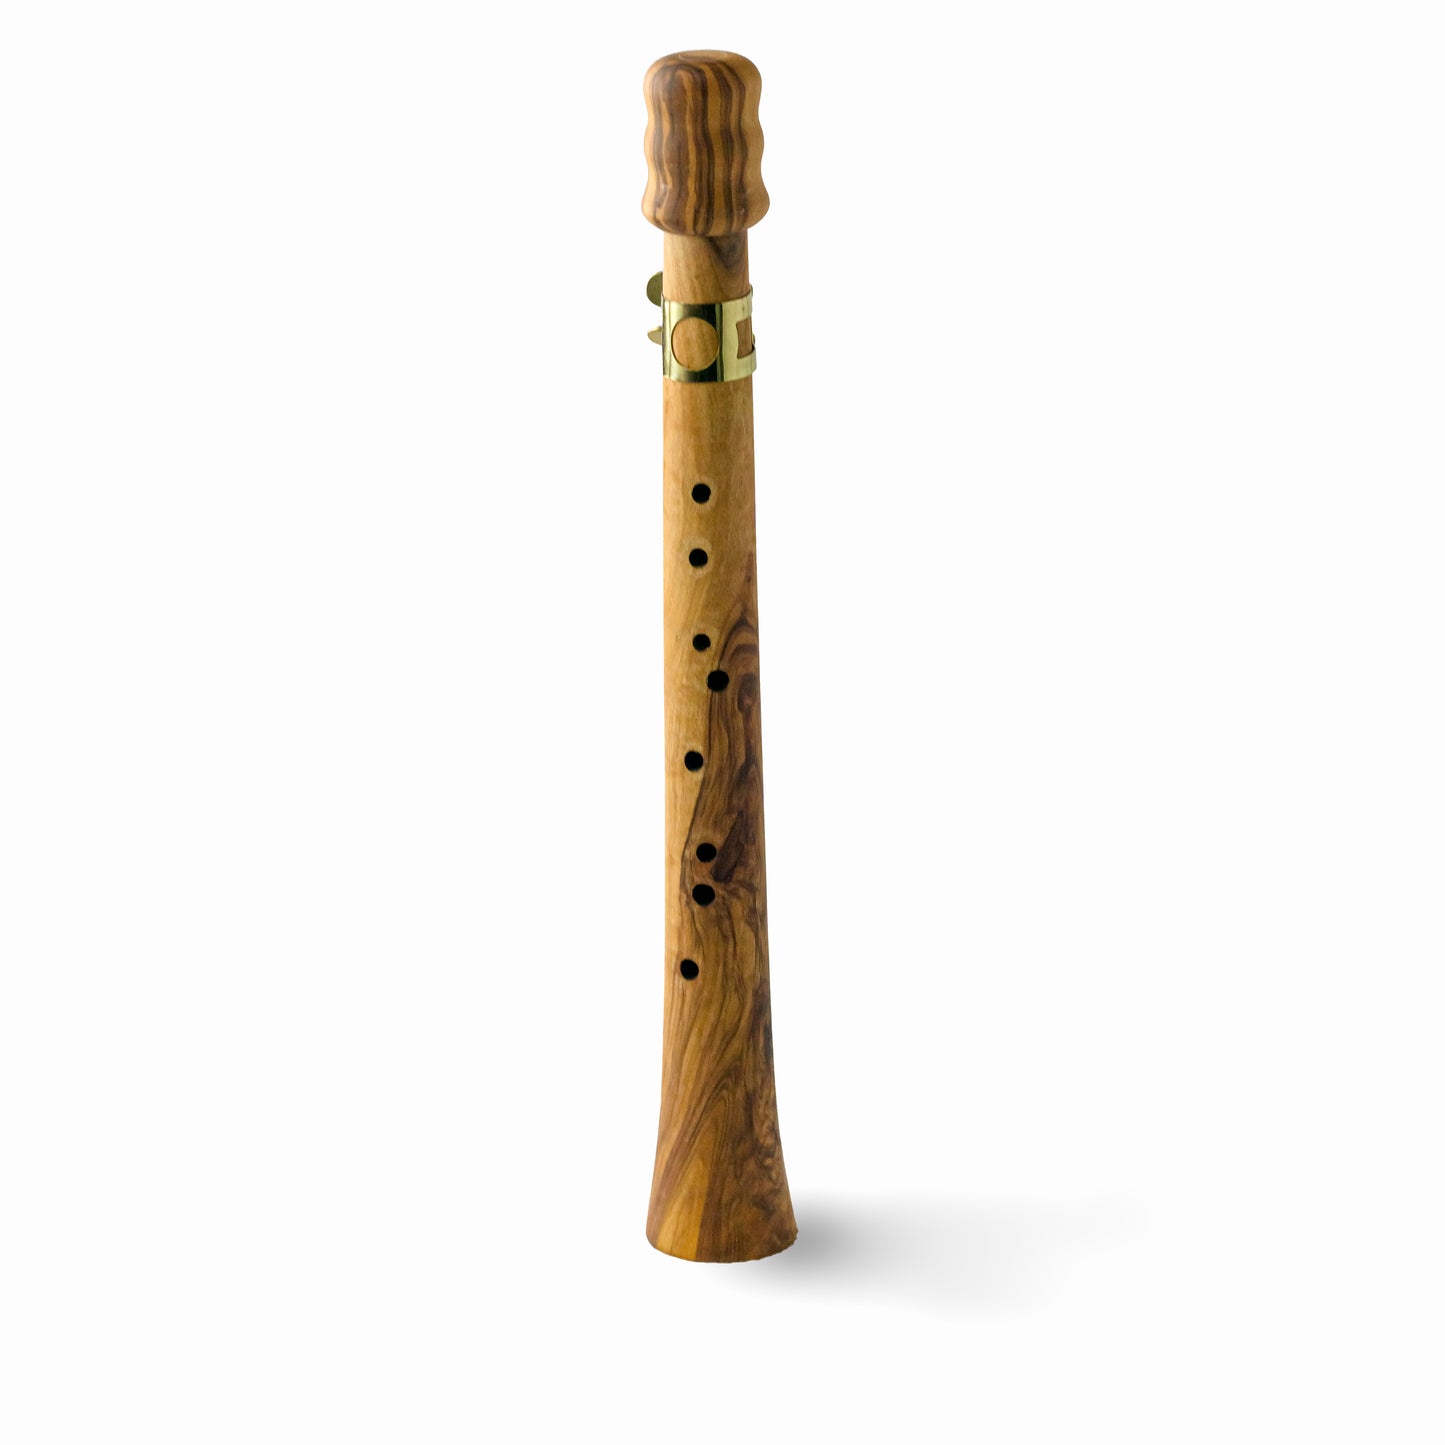 Wooden "Sax" olivewood